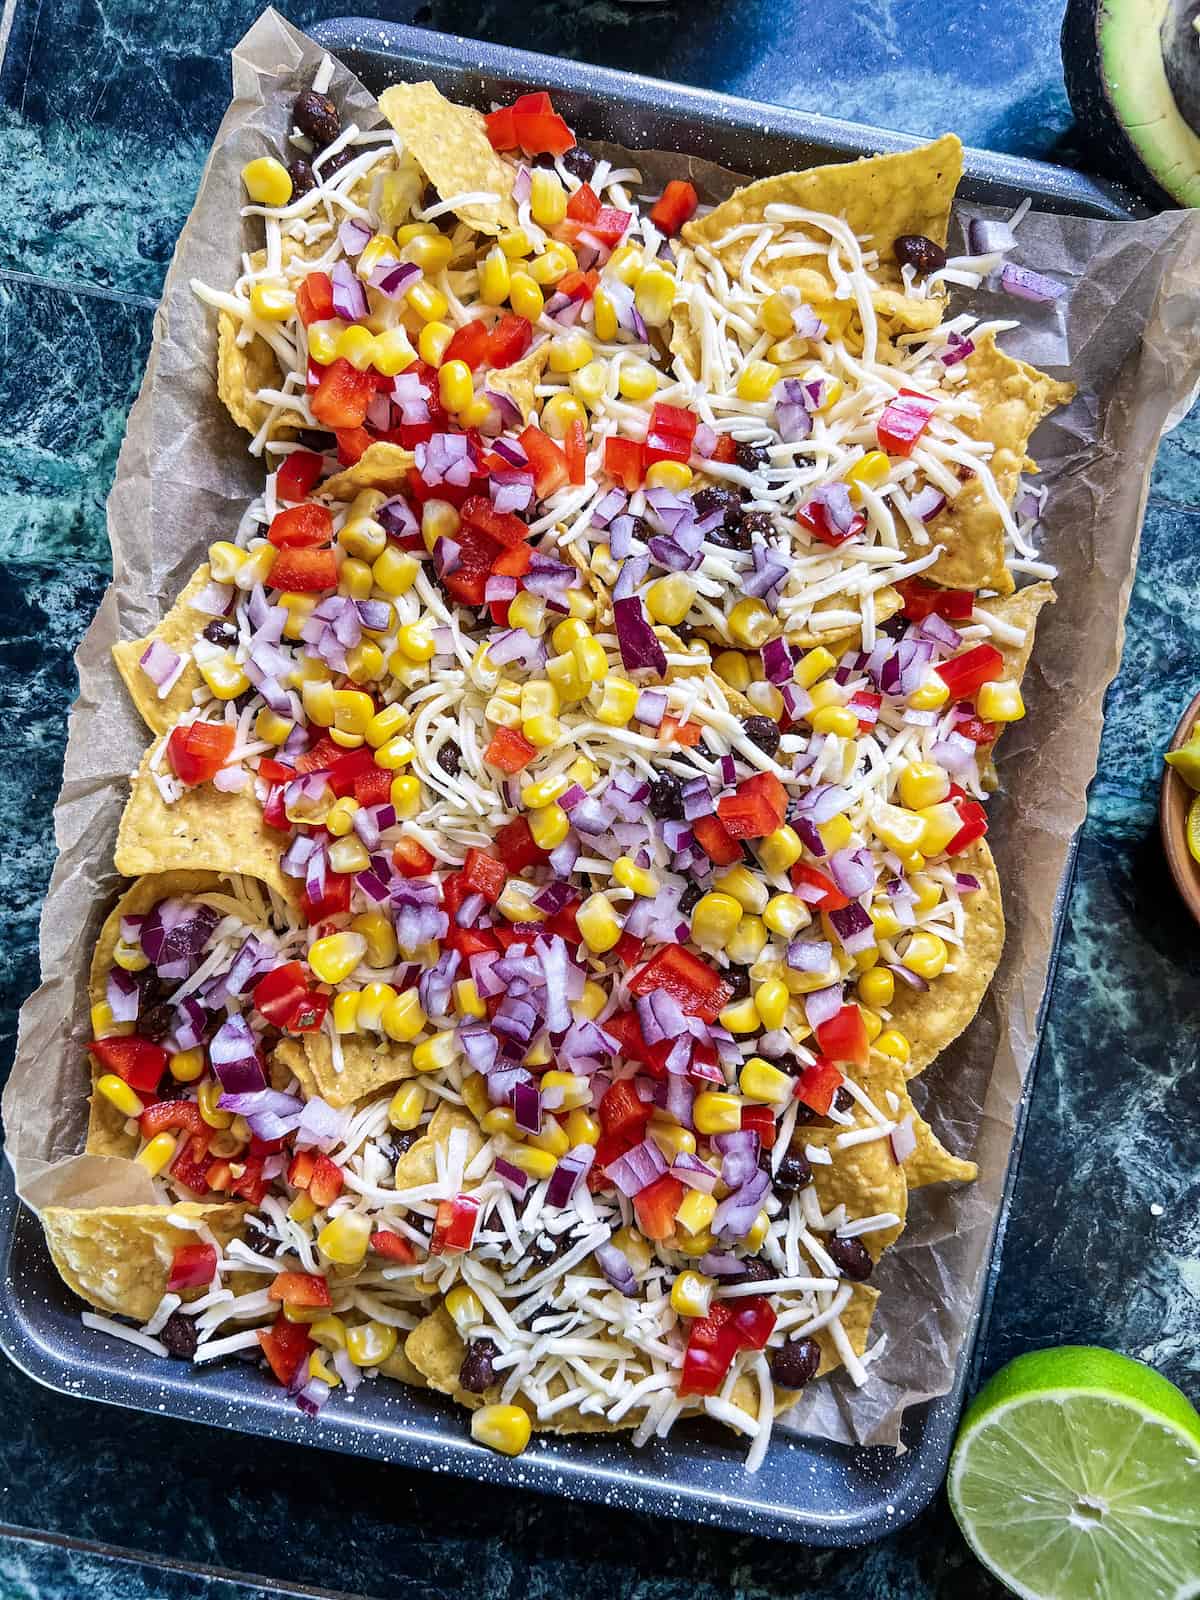 Sheet pan with tortilla chips layered with cheese, beans and finely diced veggies.